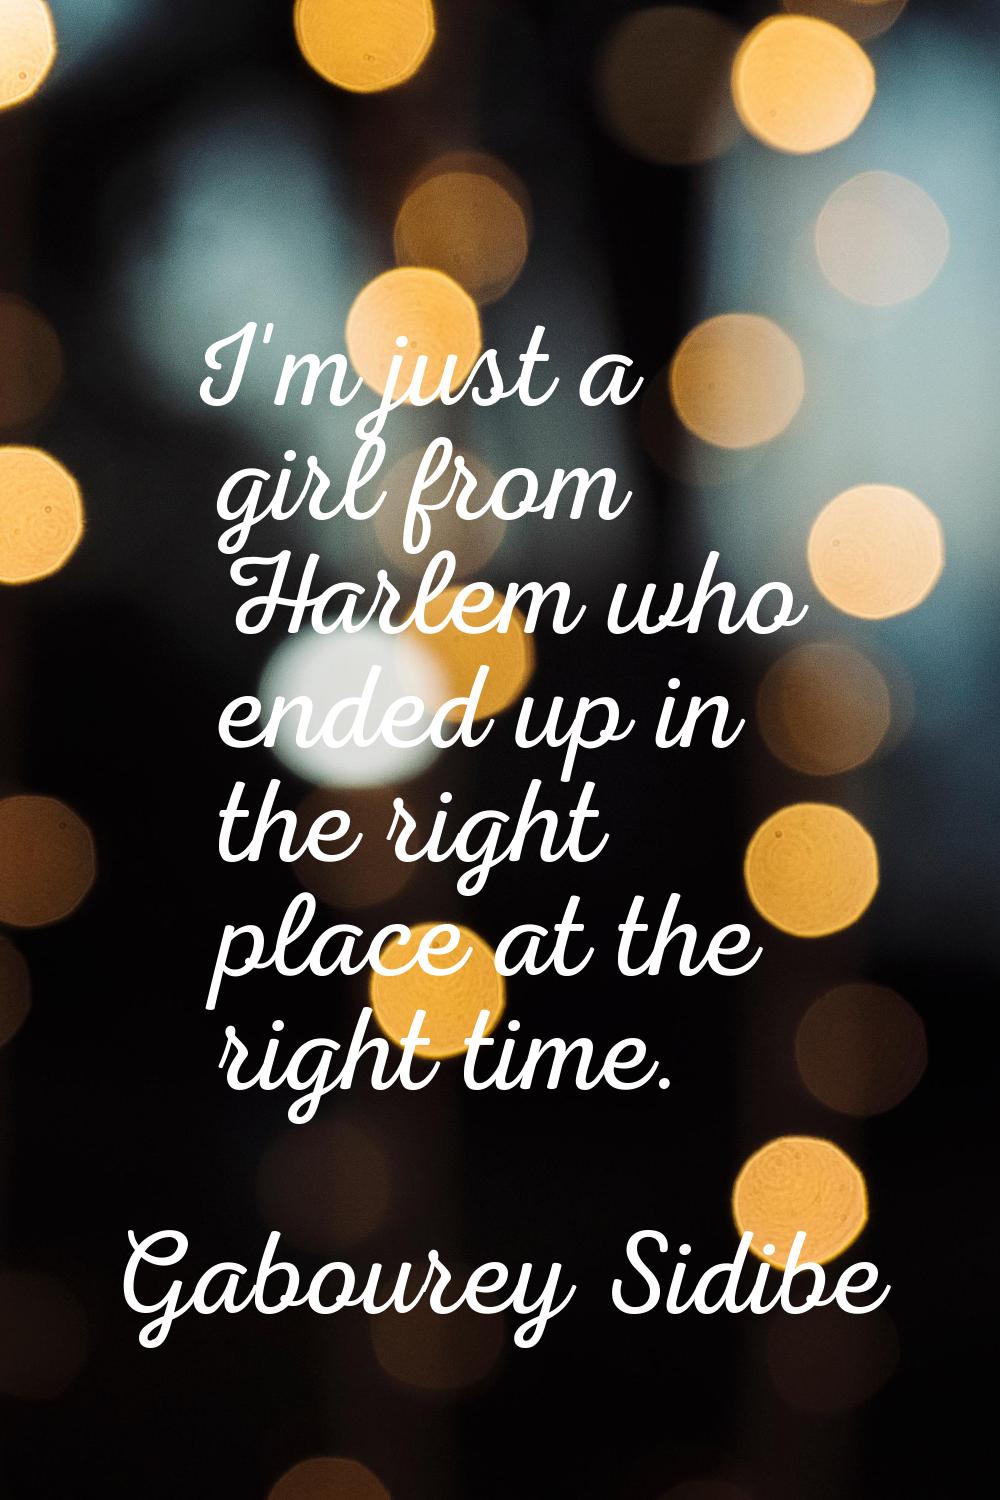 I'm just a girl from Harlem who ended up in the right place at the right time.